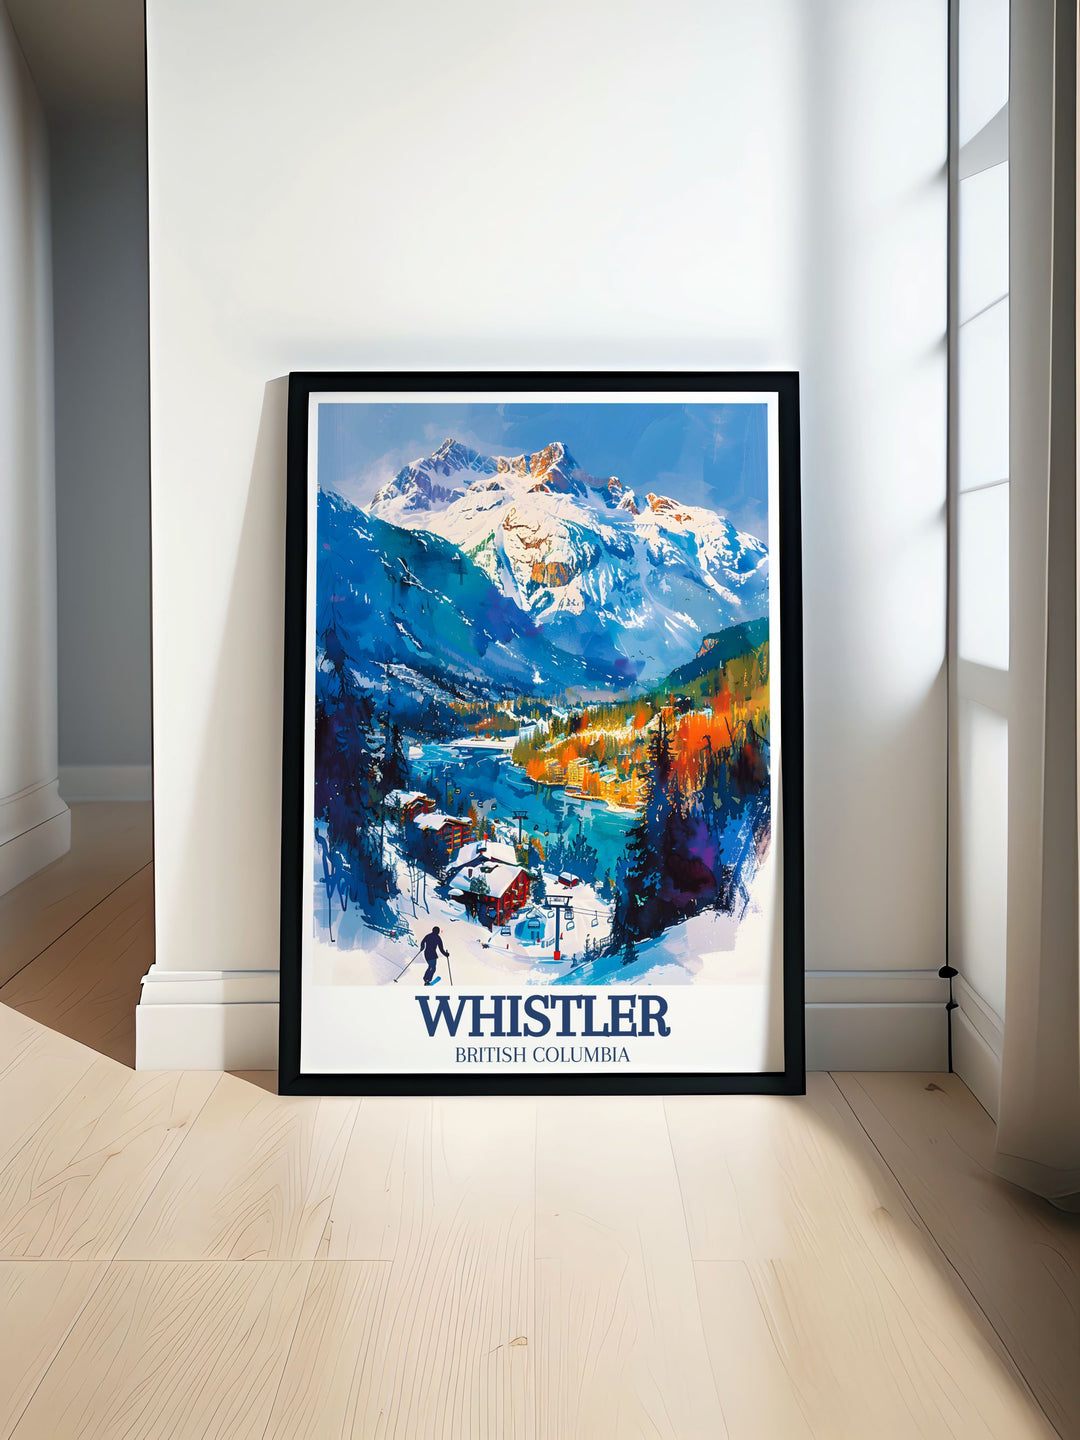 Beautiful Canada print showcasing the stunning landscapes of the Coast Mountains perfect for adding a touch of nature's beauty to any home or office decor with intricate details and vibrant colors